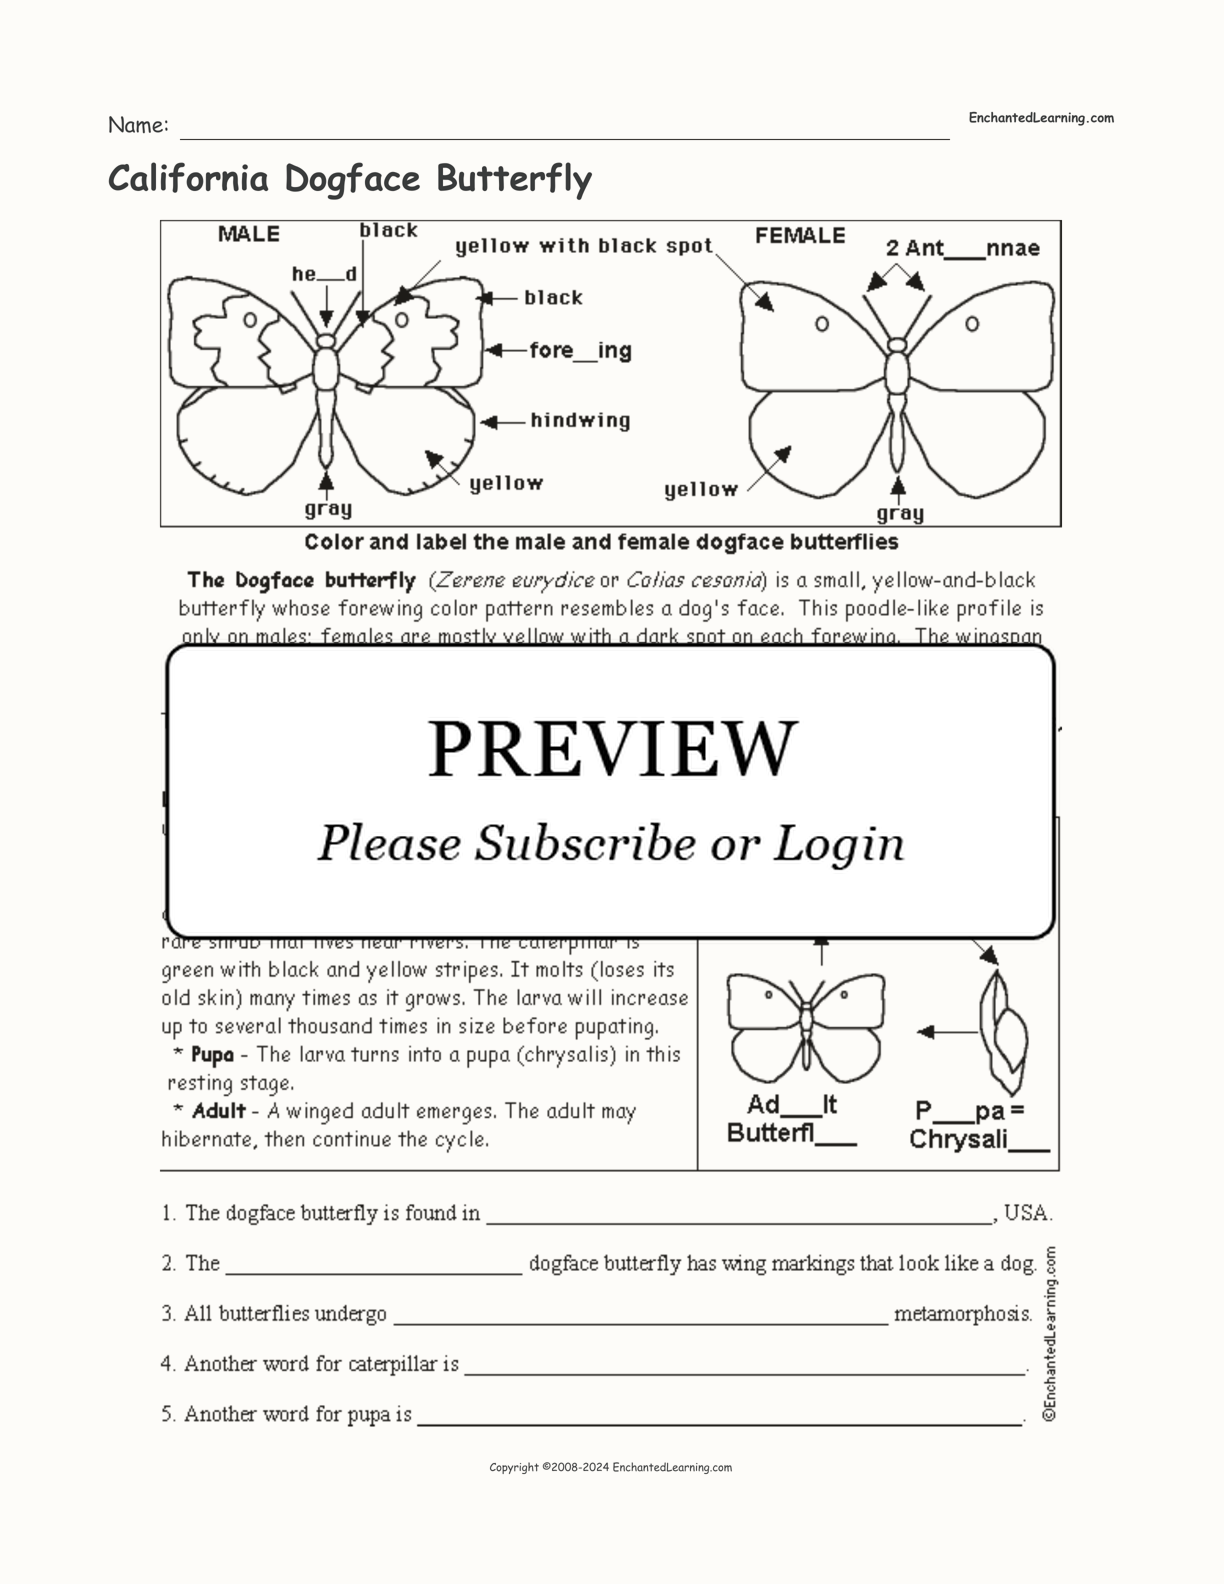 California Dogface Butterfly interactive worksheet page 1